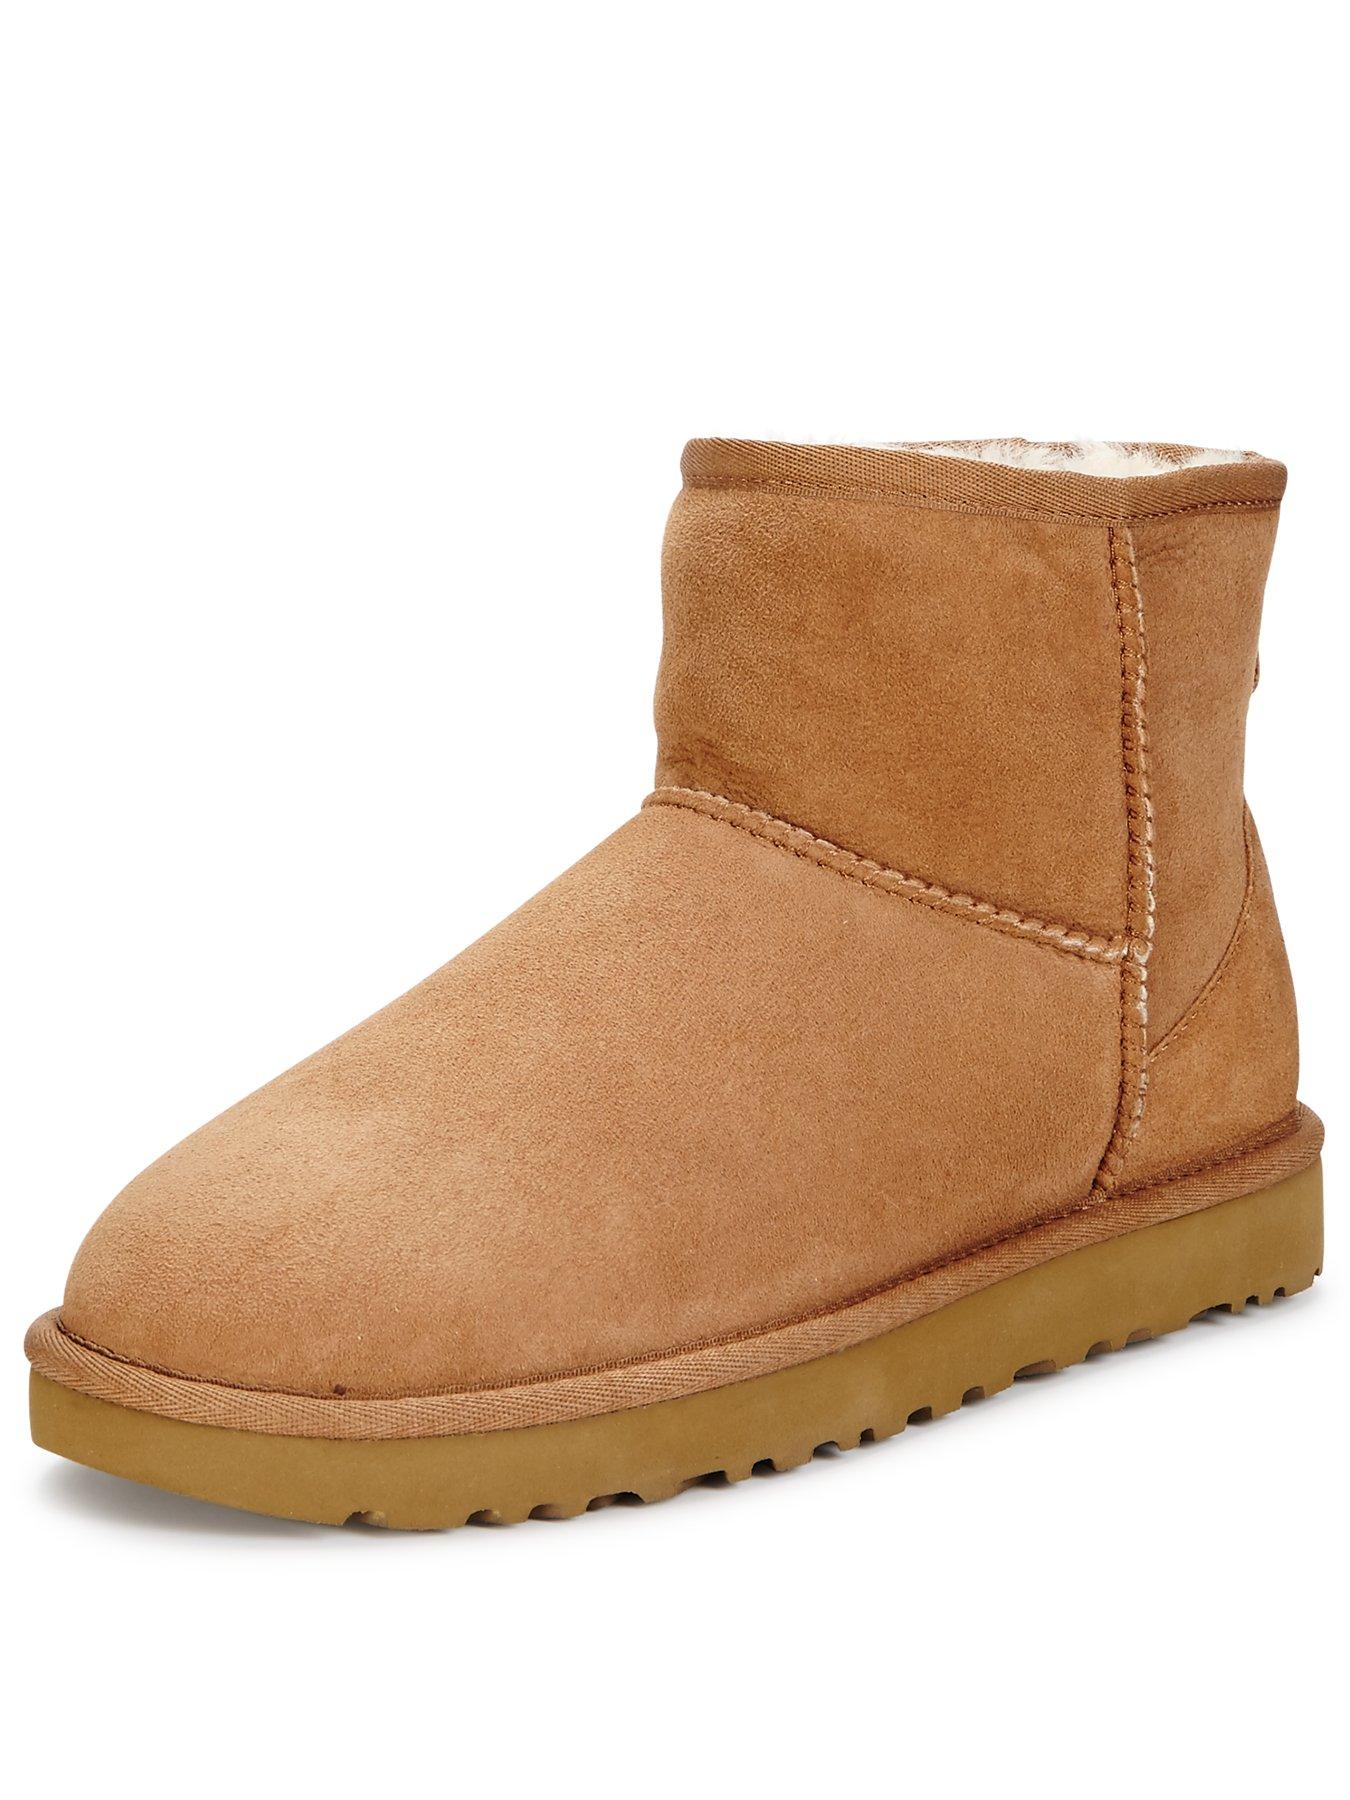 ugg boots classic chestnut